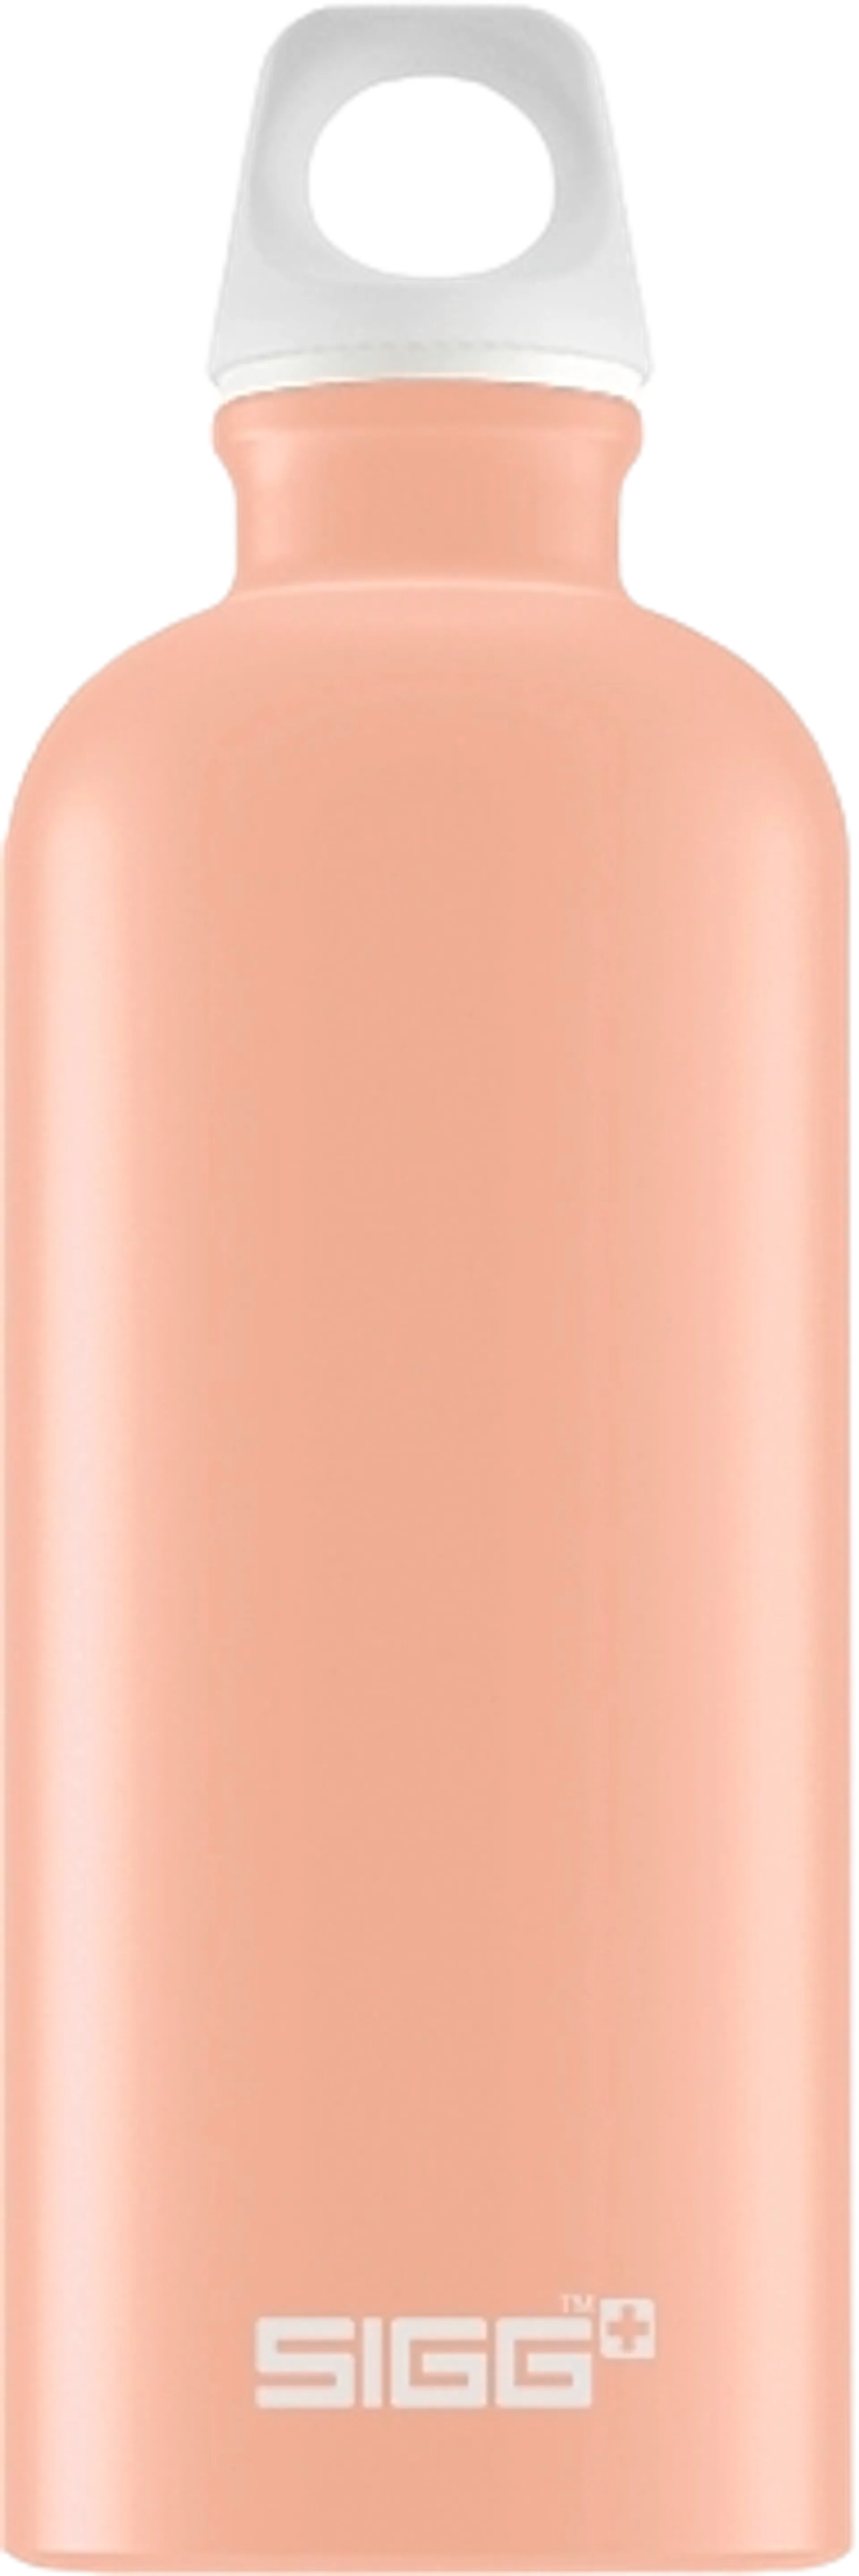 SIGG Juomapullo 0,6 L Lucid Shy Pink Touch